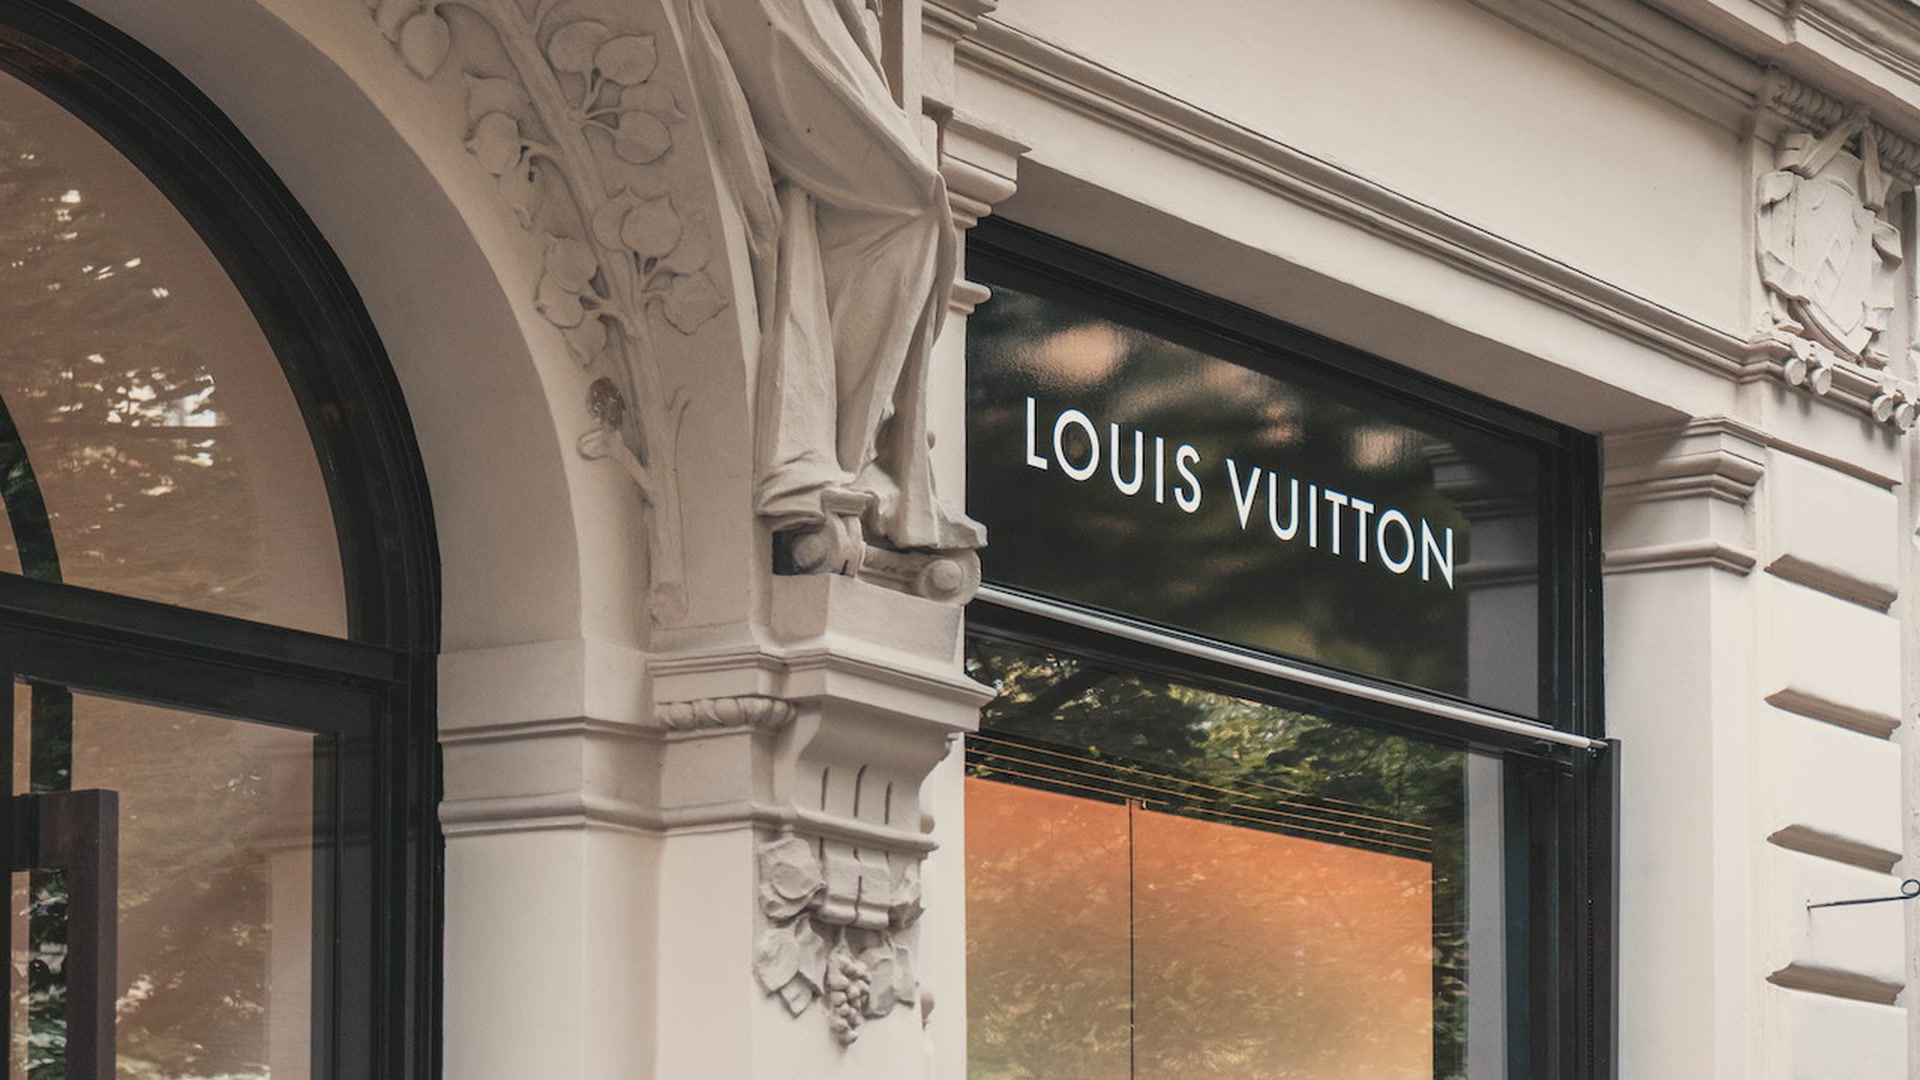 Louis Vuitton to Release $42K Worth of Physical-Backed NFTs